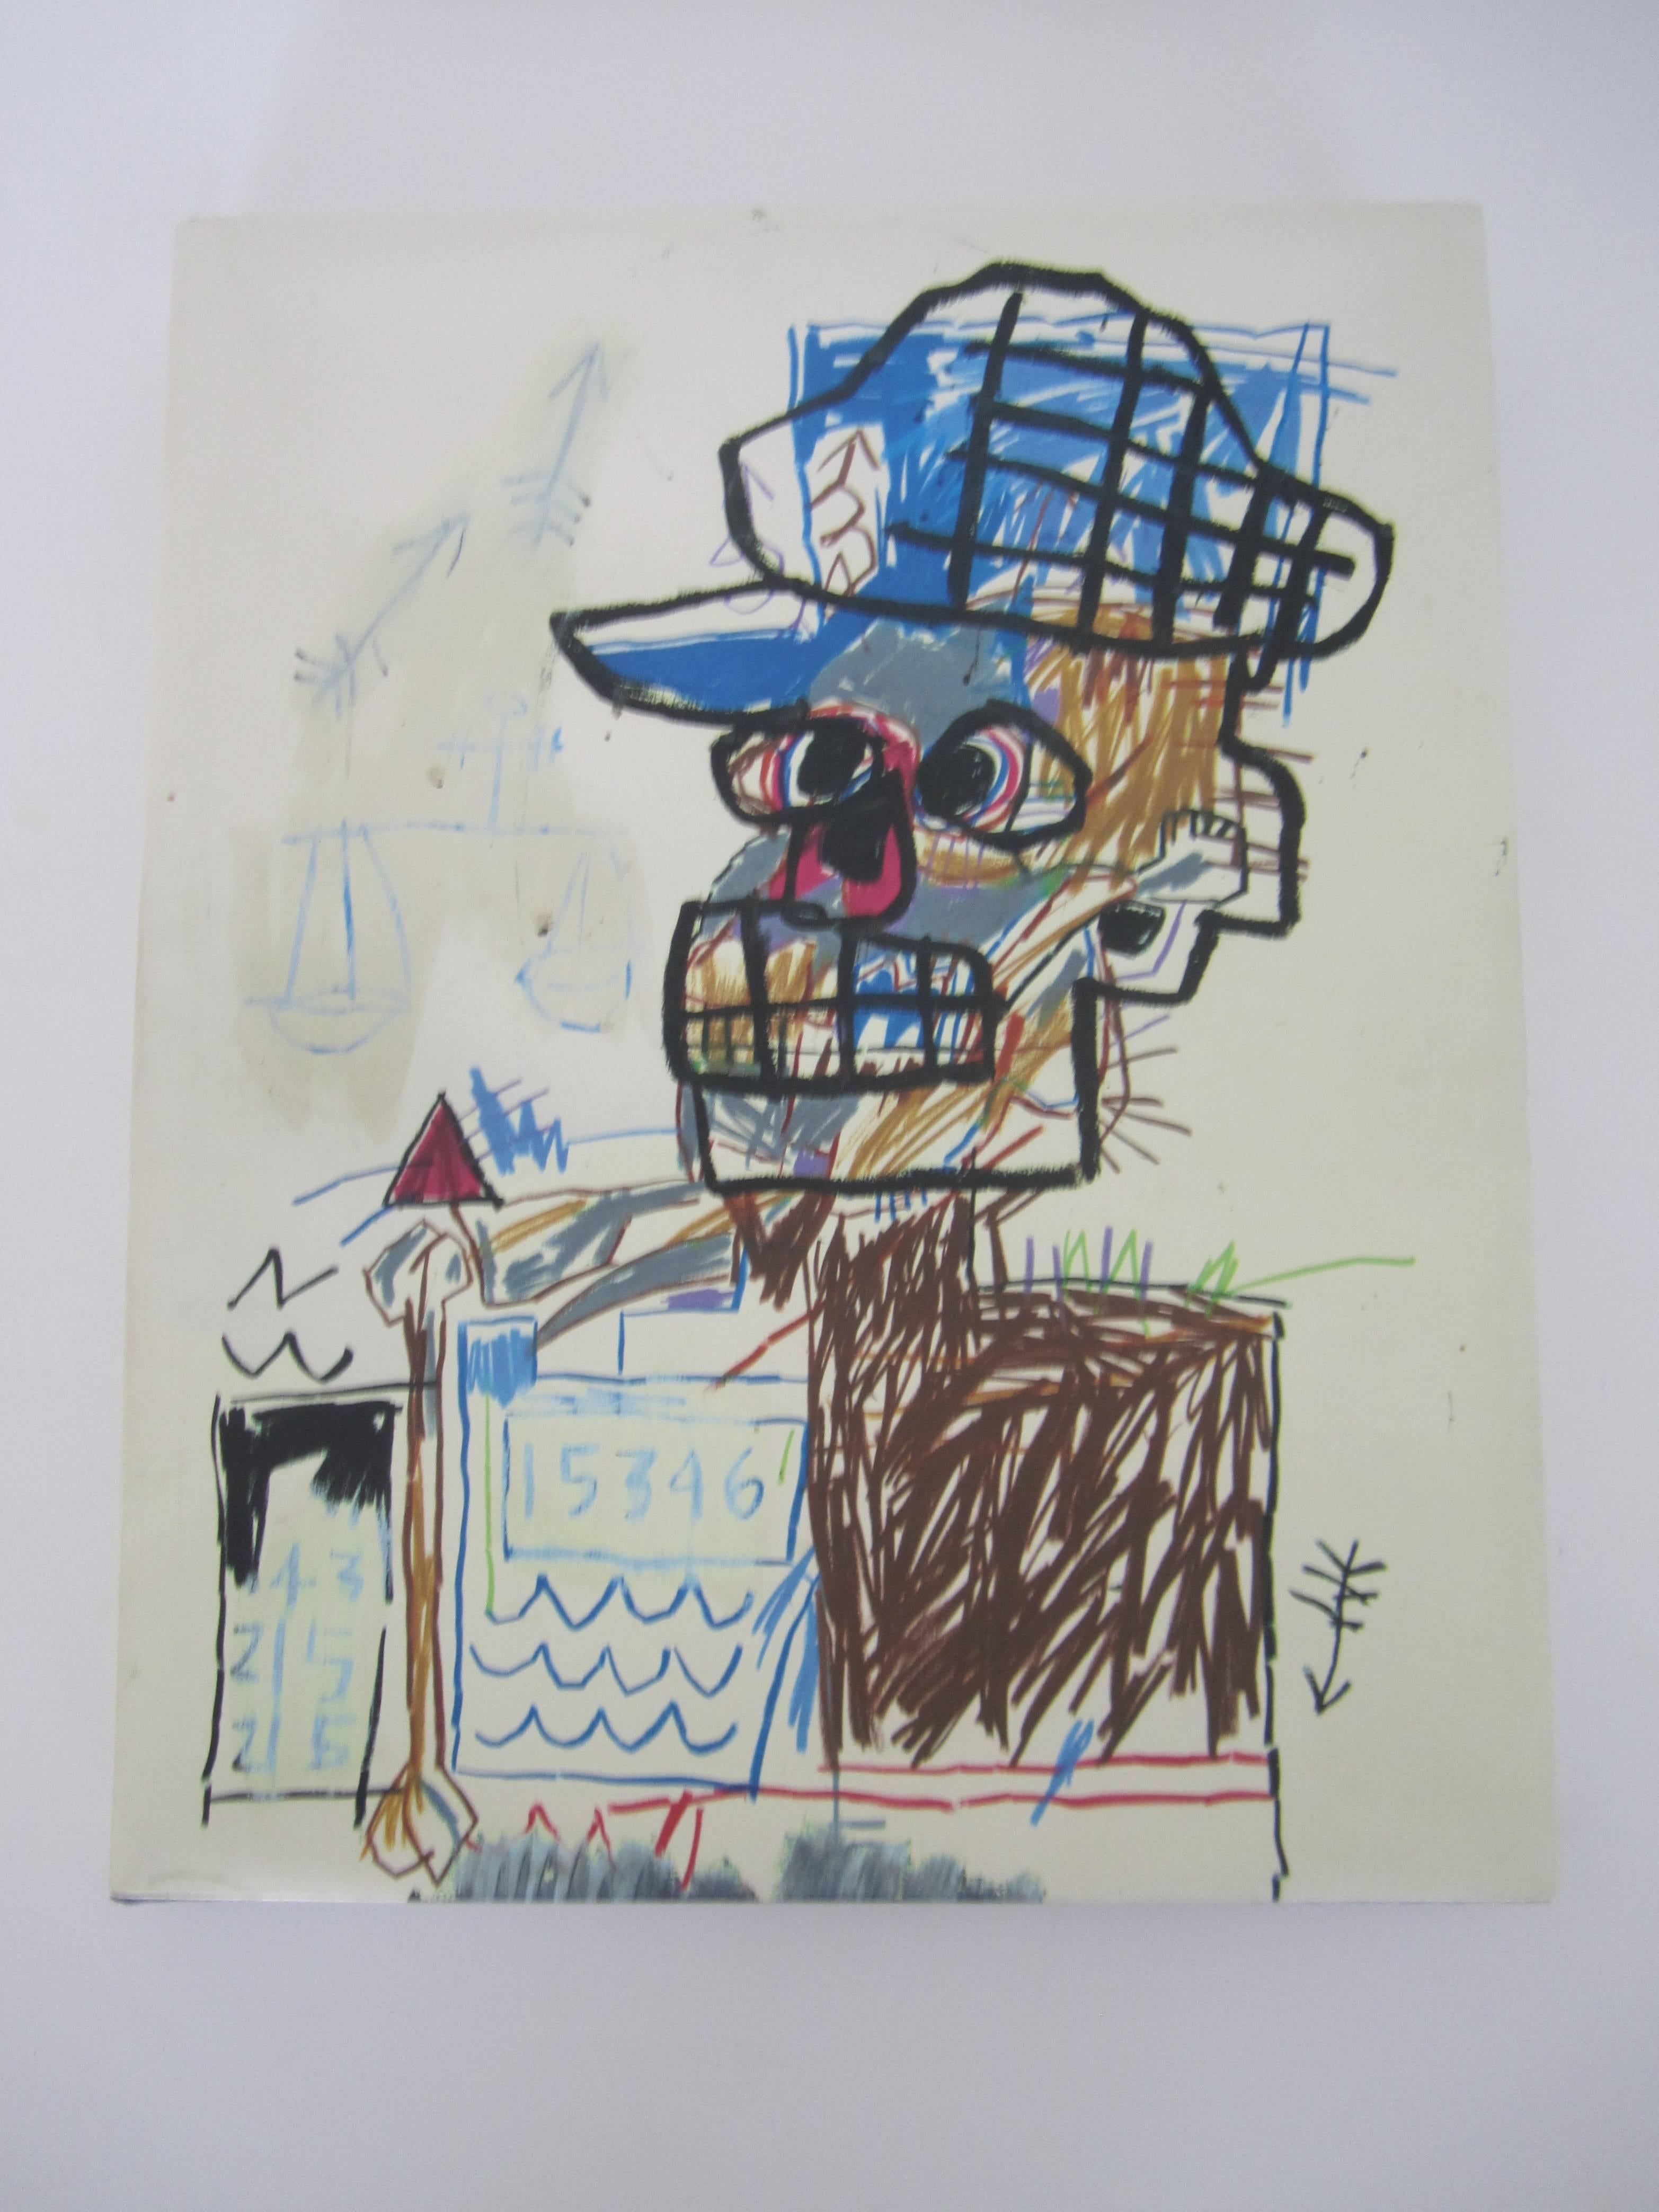 A Jean-Michel Basquiat drawing coffee table or library book. A story, with original writing and work, of the Brooklyn born artist from a private New York collection. Book is 'perfect bound hard cover' with a folded 'dust jacket' cover.